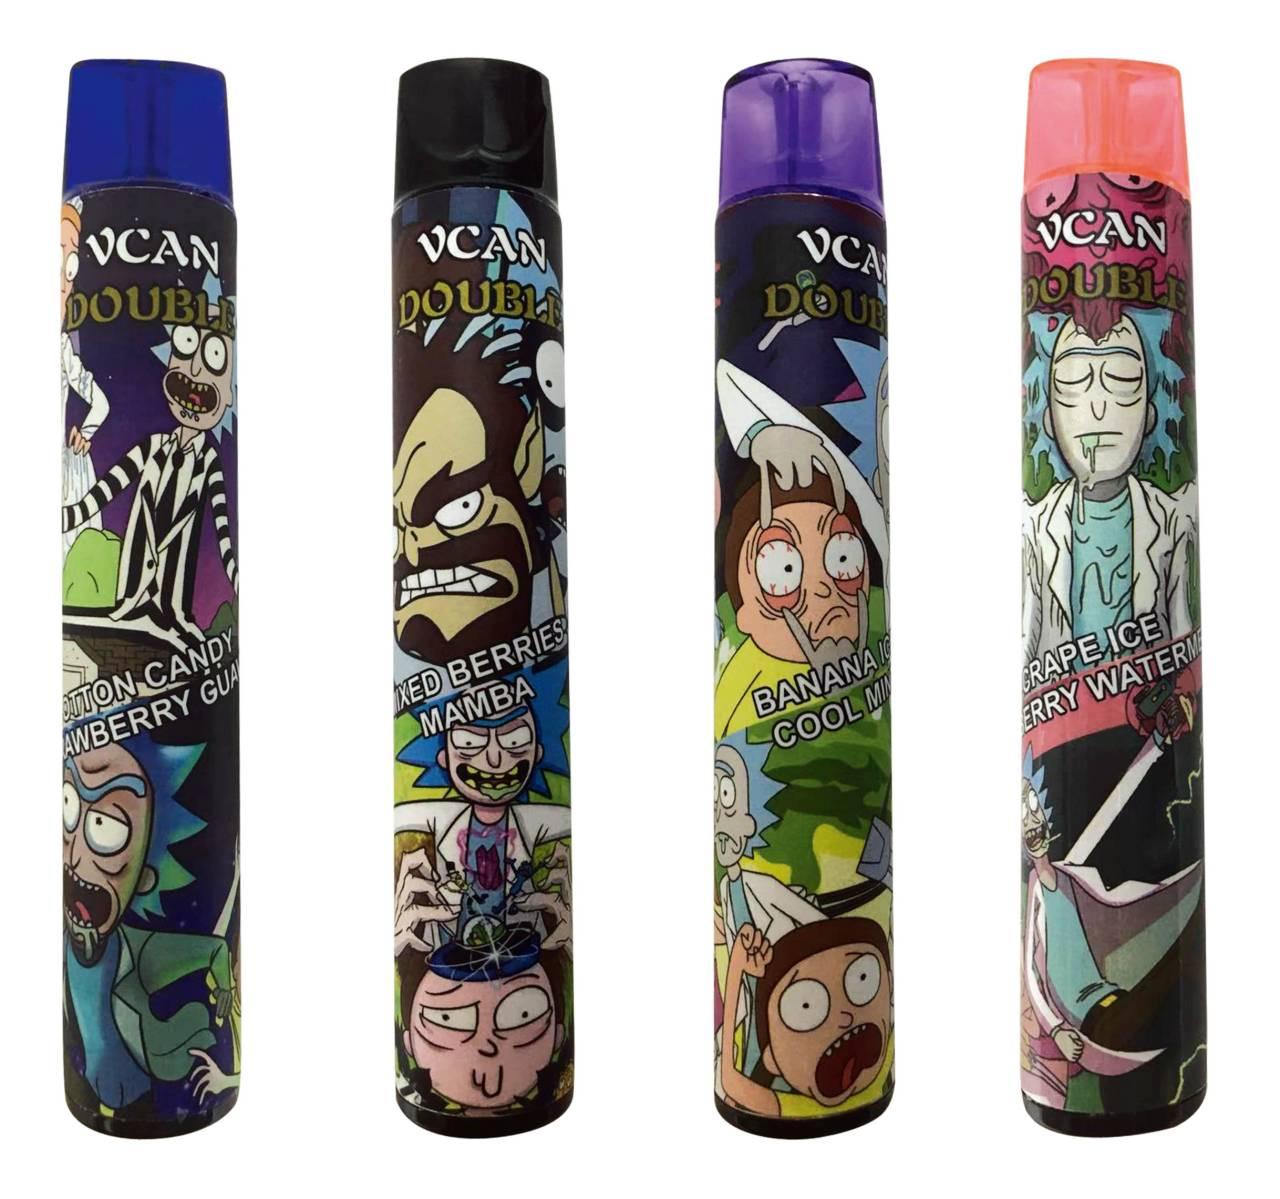 Vcan Double 2 in 1 Dual Flavors Disposable 2000puffs 1000mAh